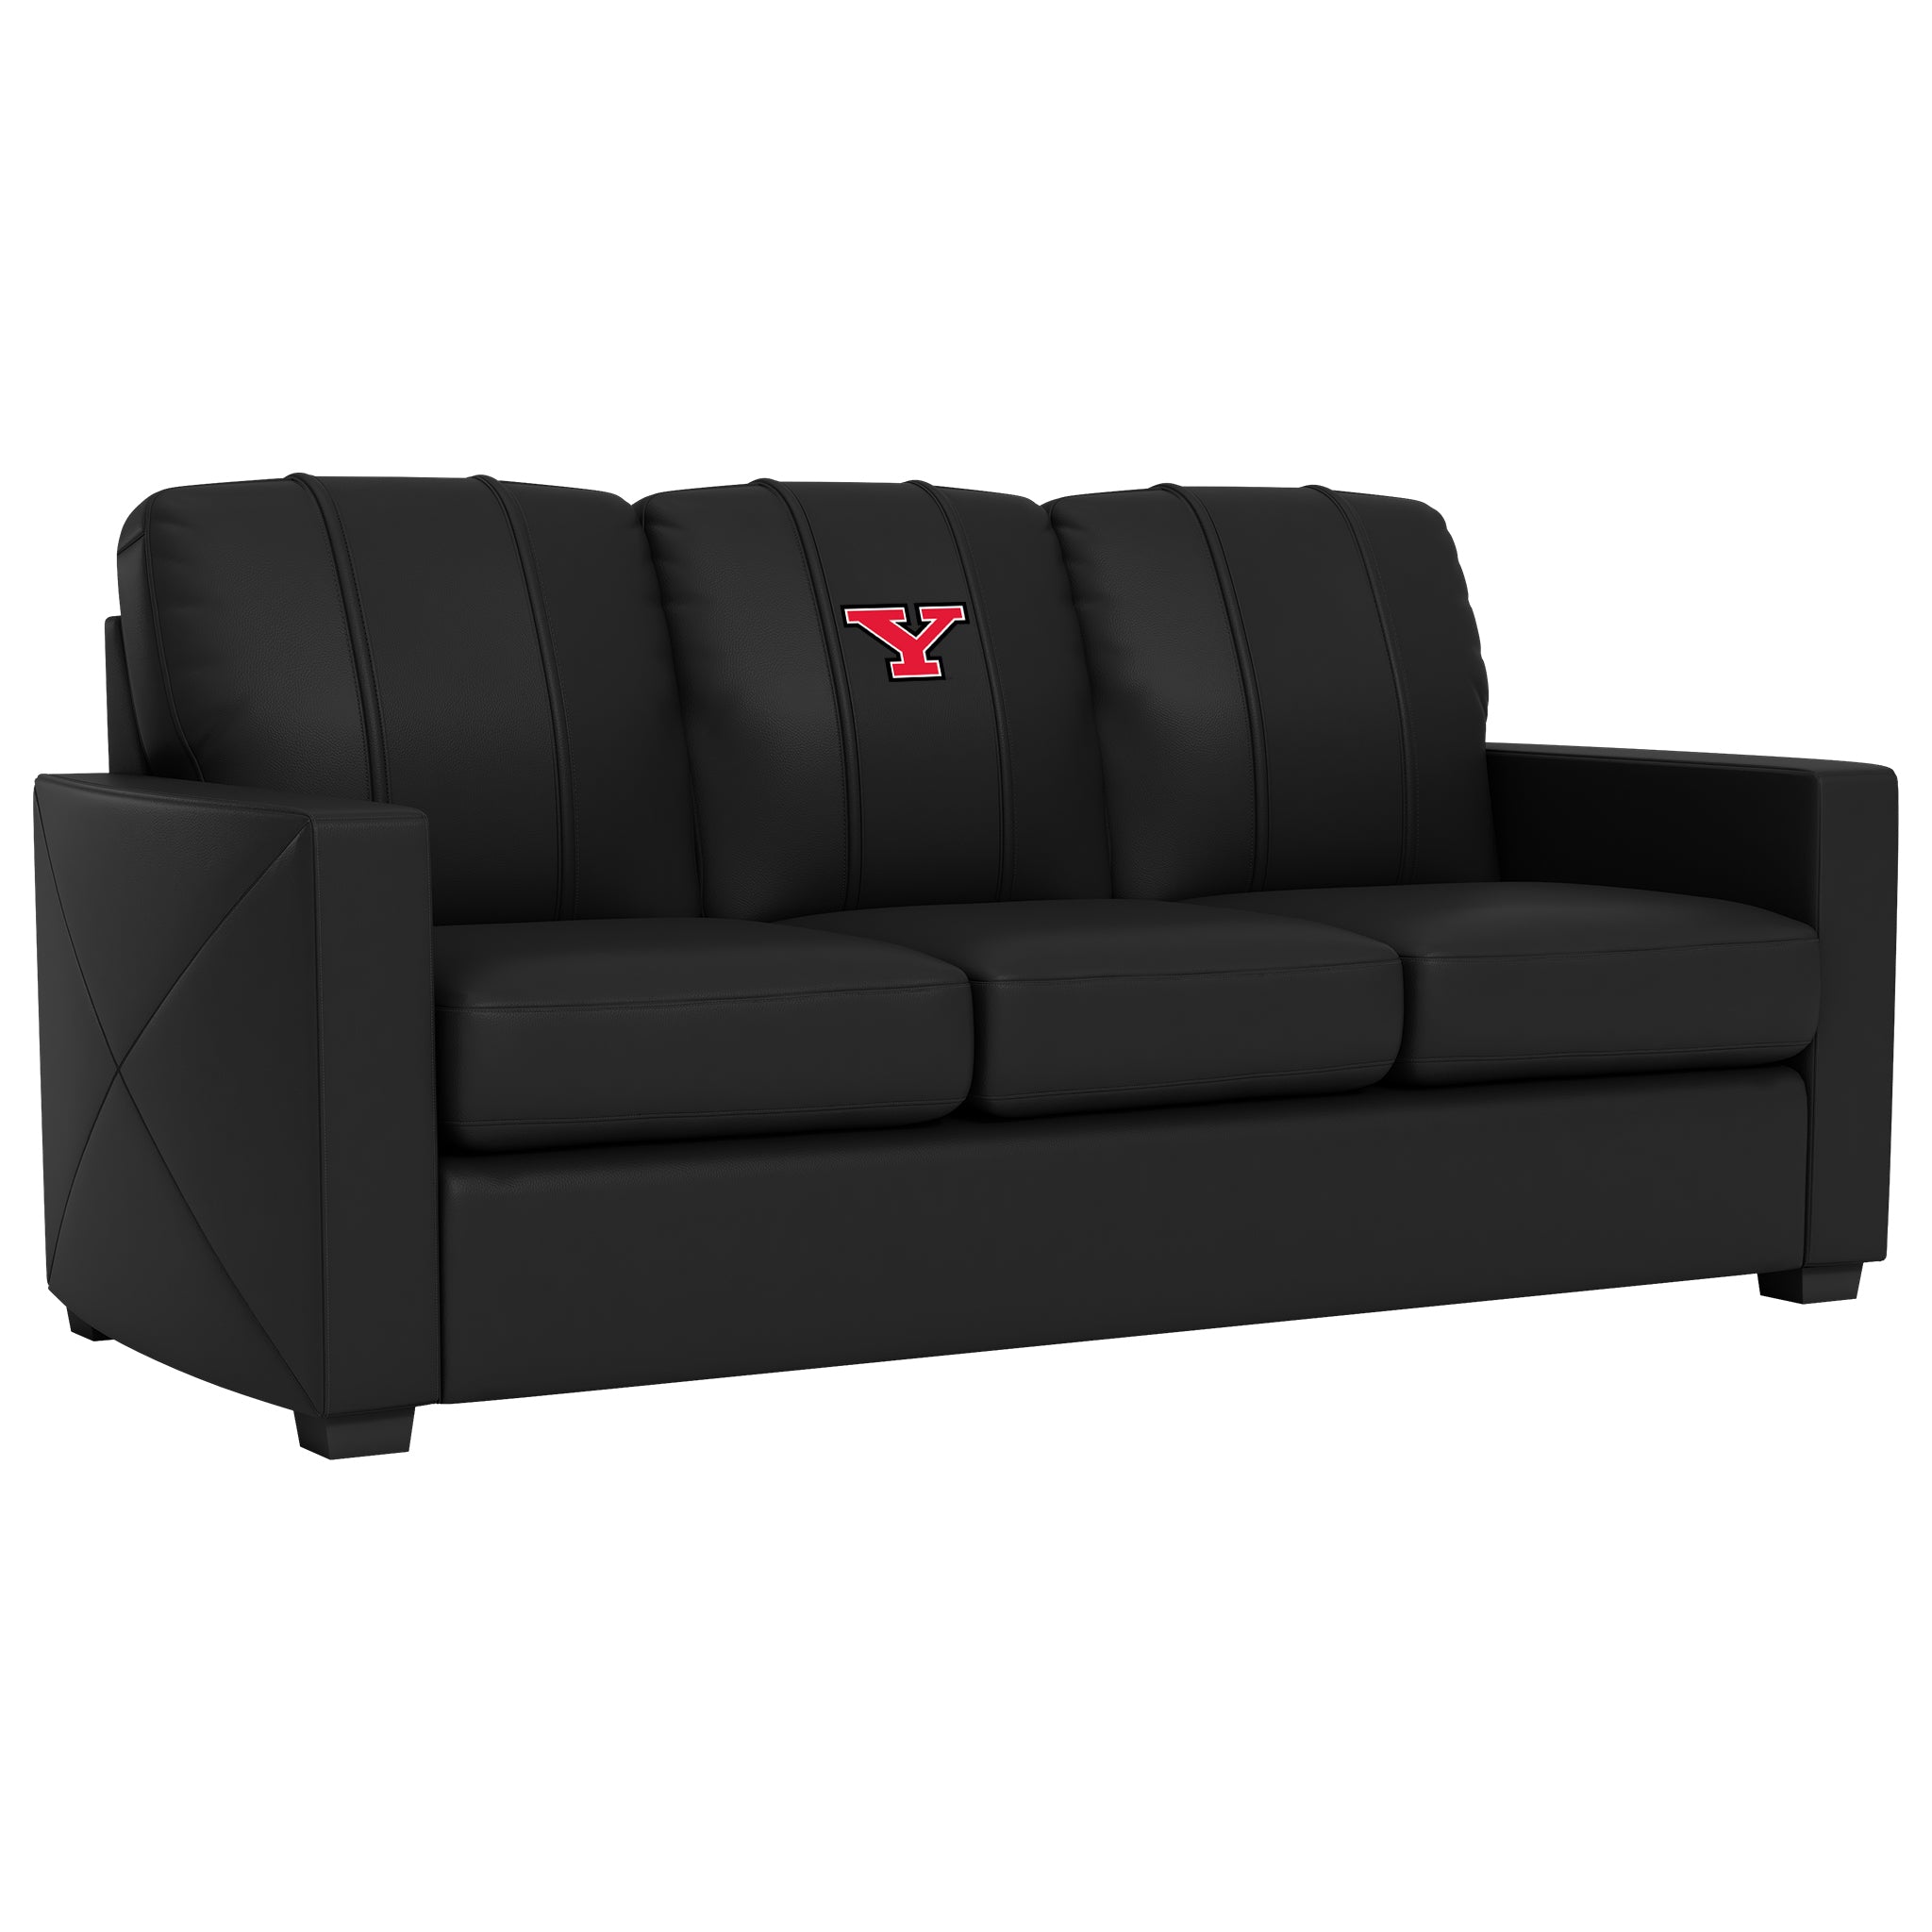 Youngstown State Silver Sofa with Youngstown State Secondary Logo